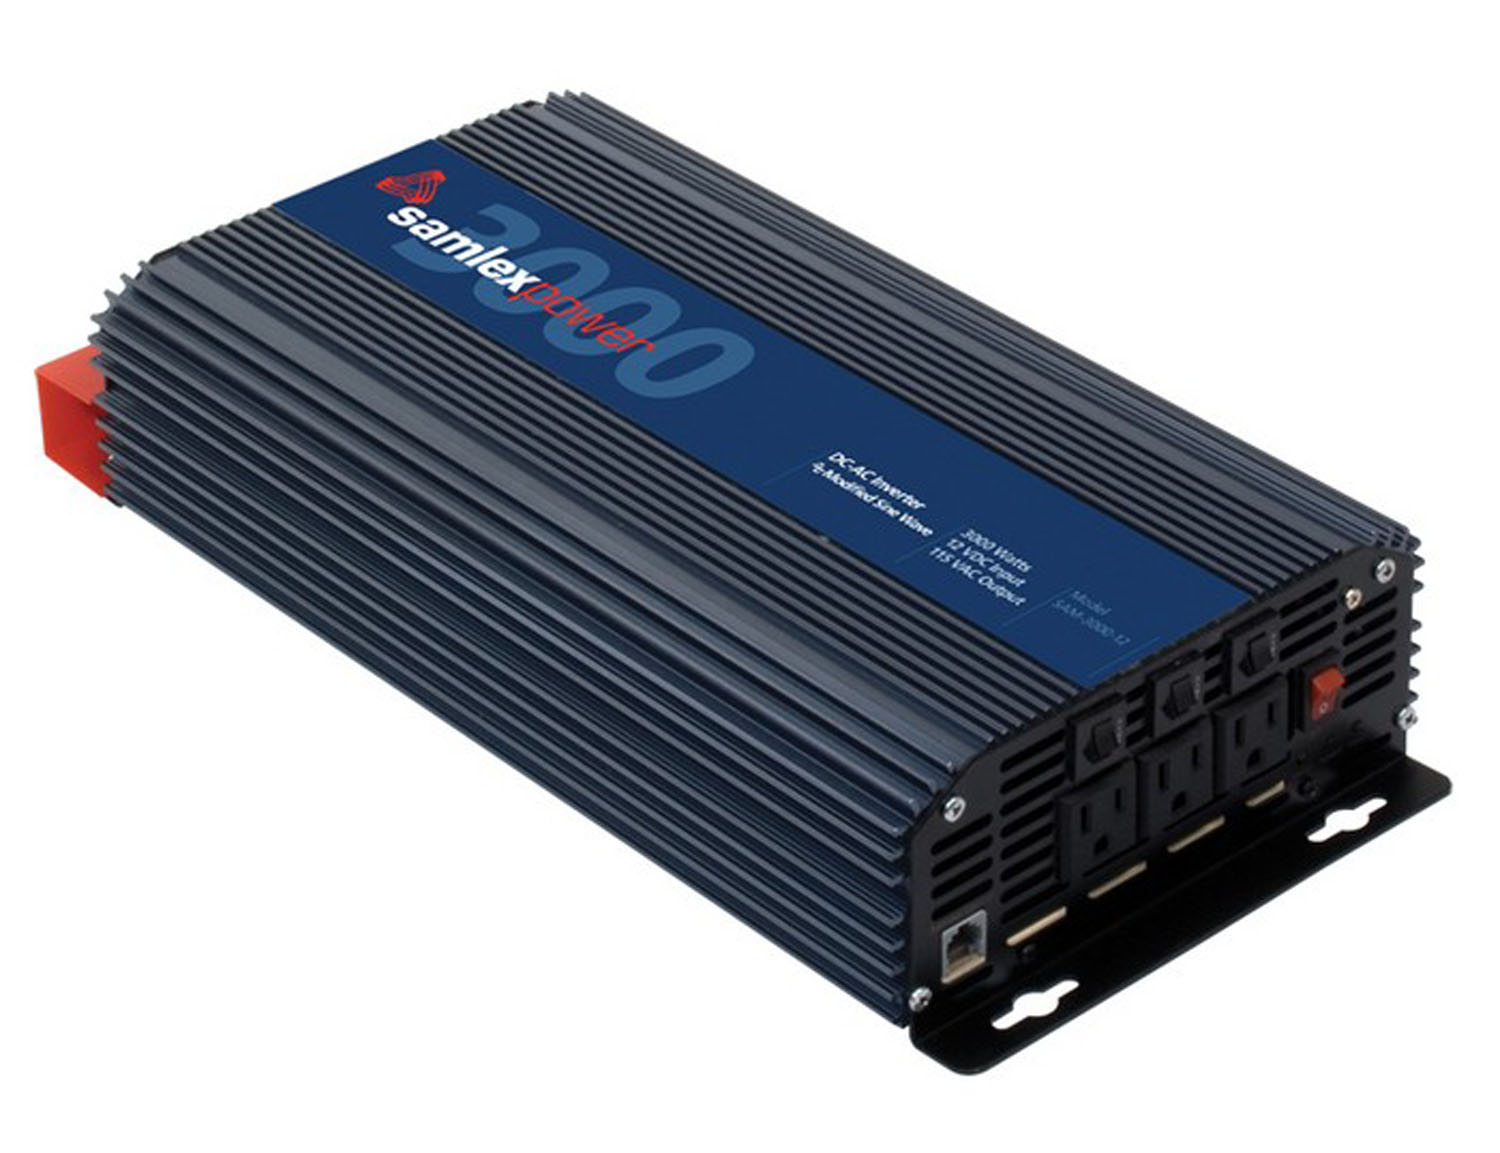 SAM300012 3,000 Watt (6,000 Watt Surge) Modified Sine Wave Inverter With 3 Outlets & Cooling Fan. Remote Control Available